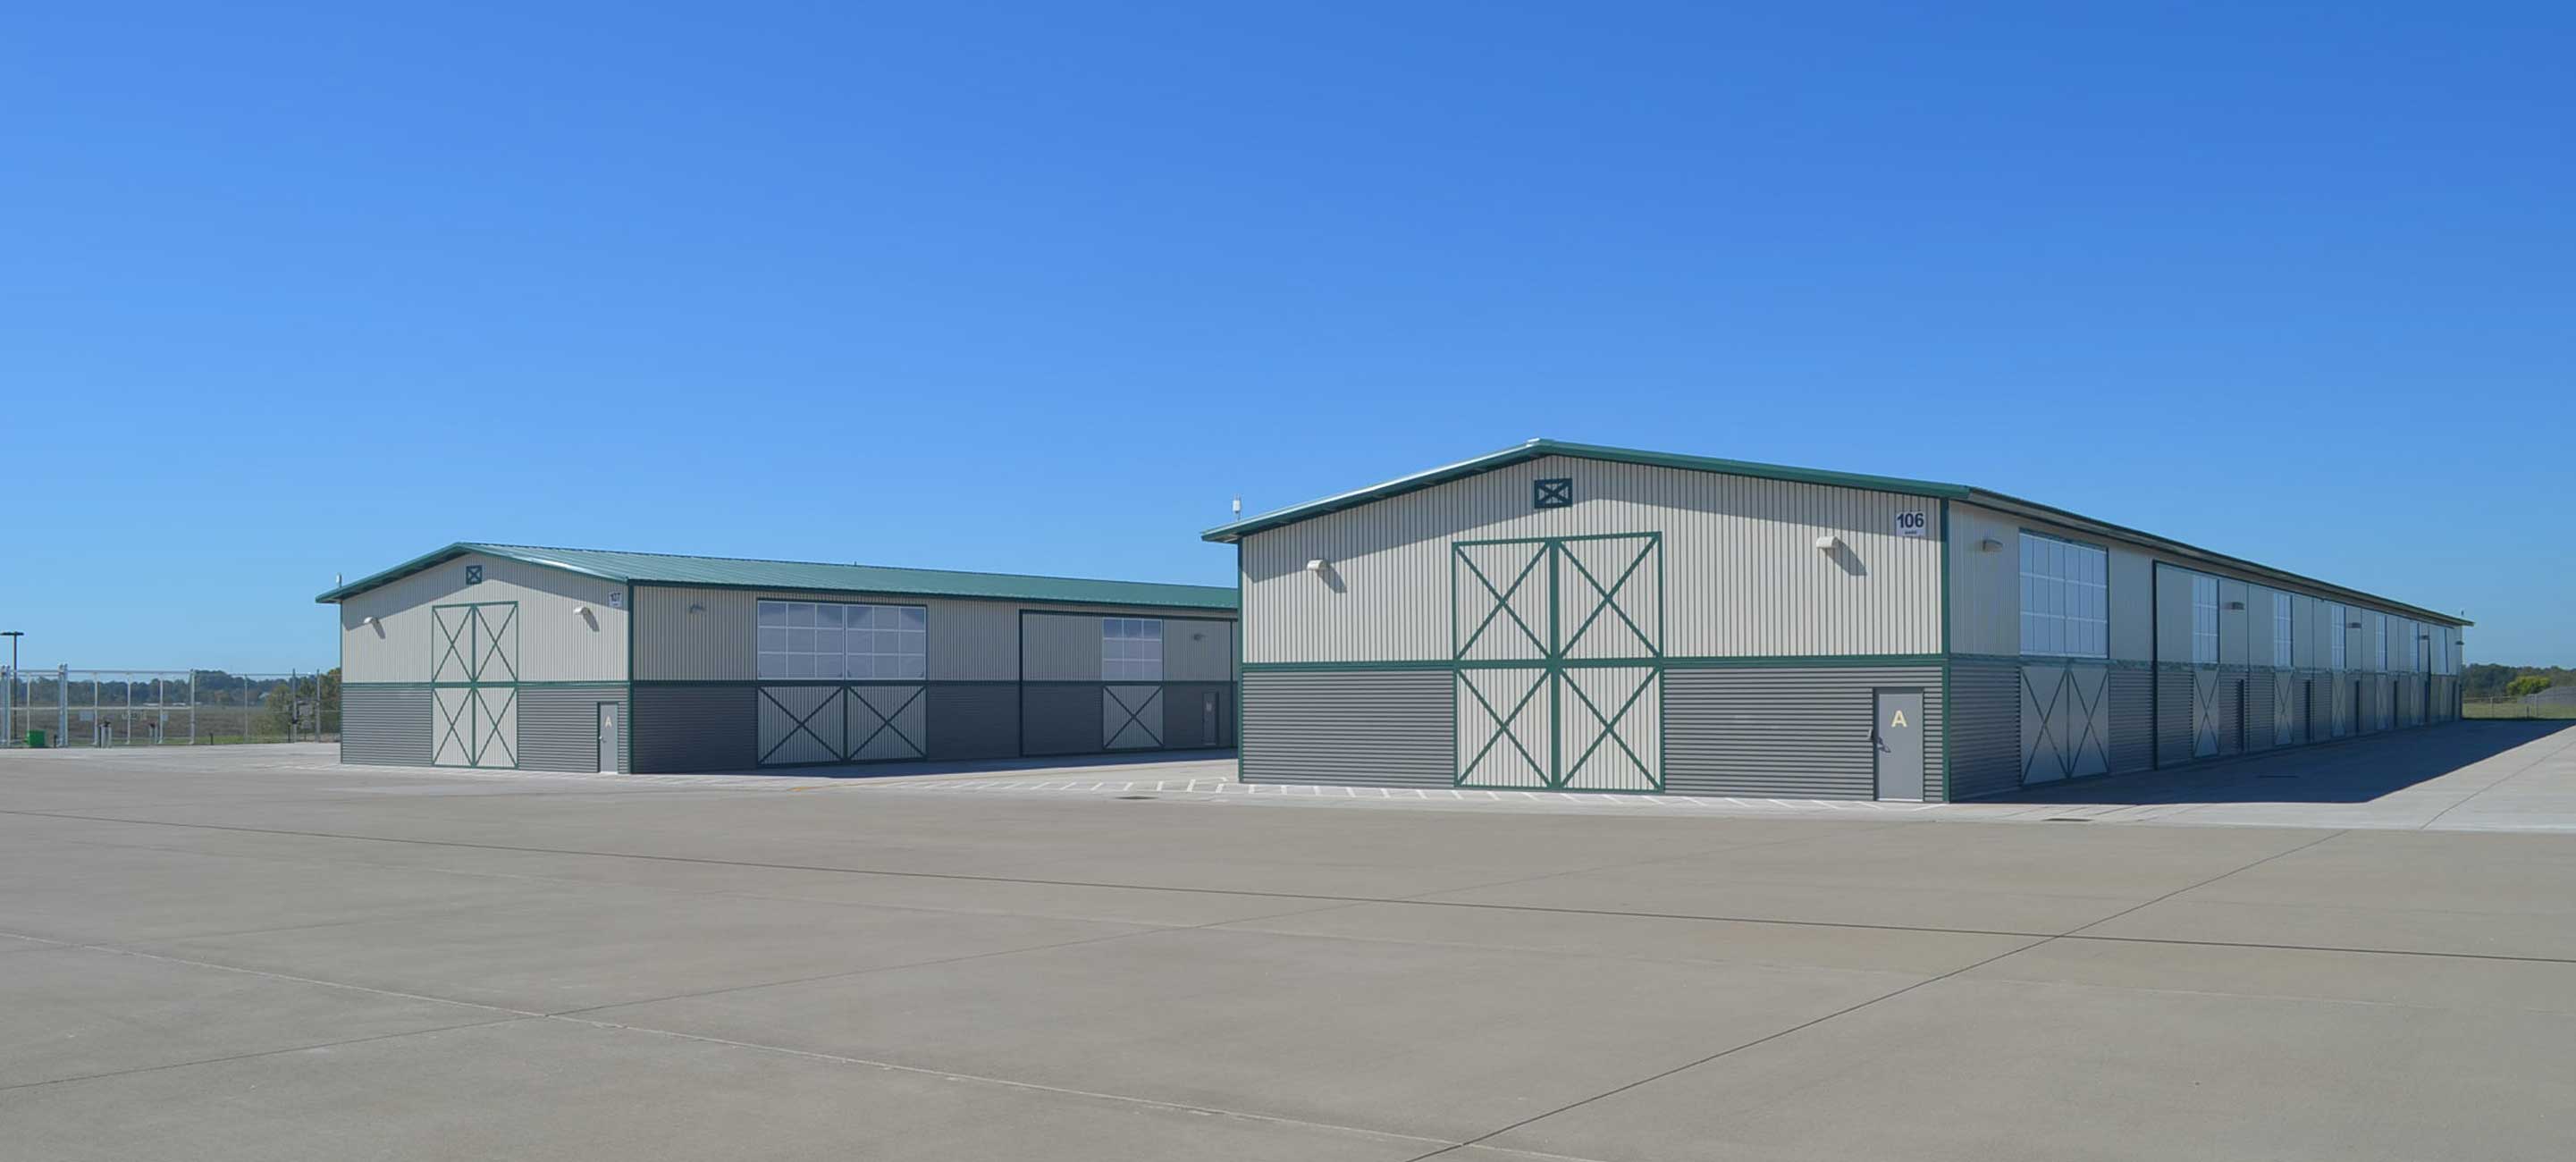 Blue Grass Airport Receives Architectural Award</br>for New Westside Hangars